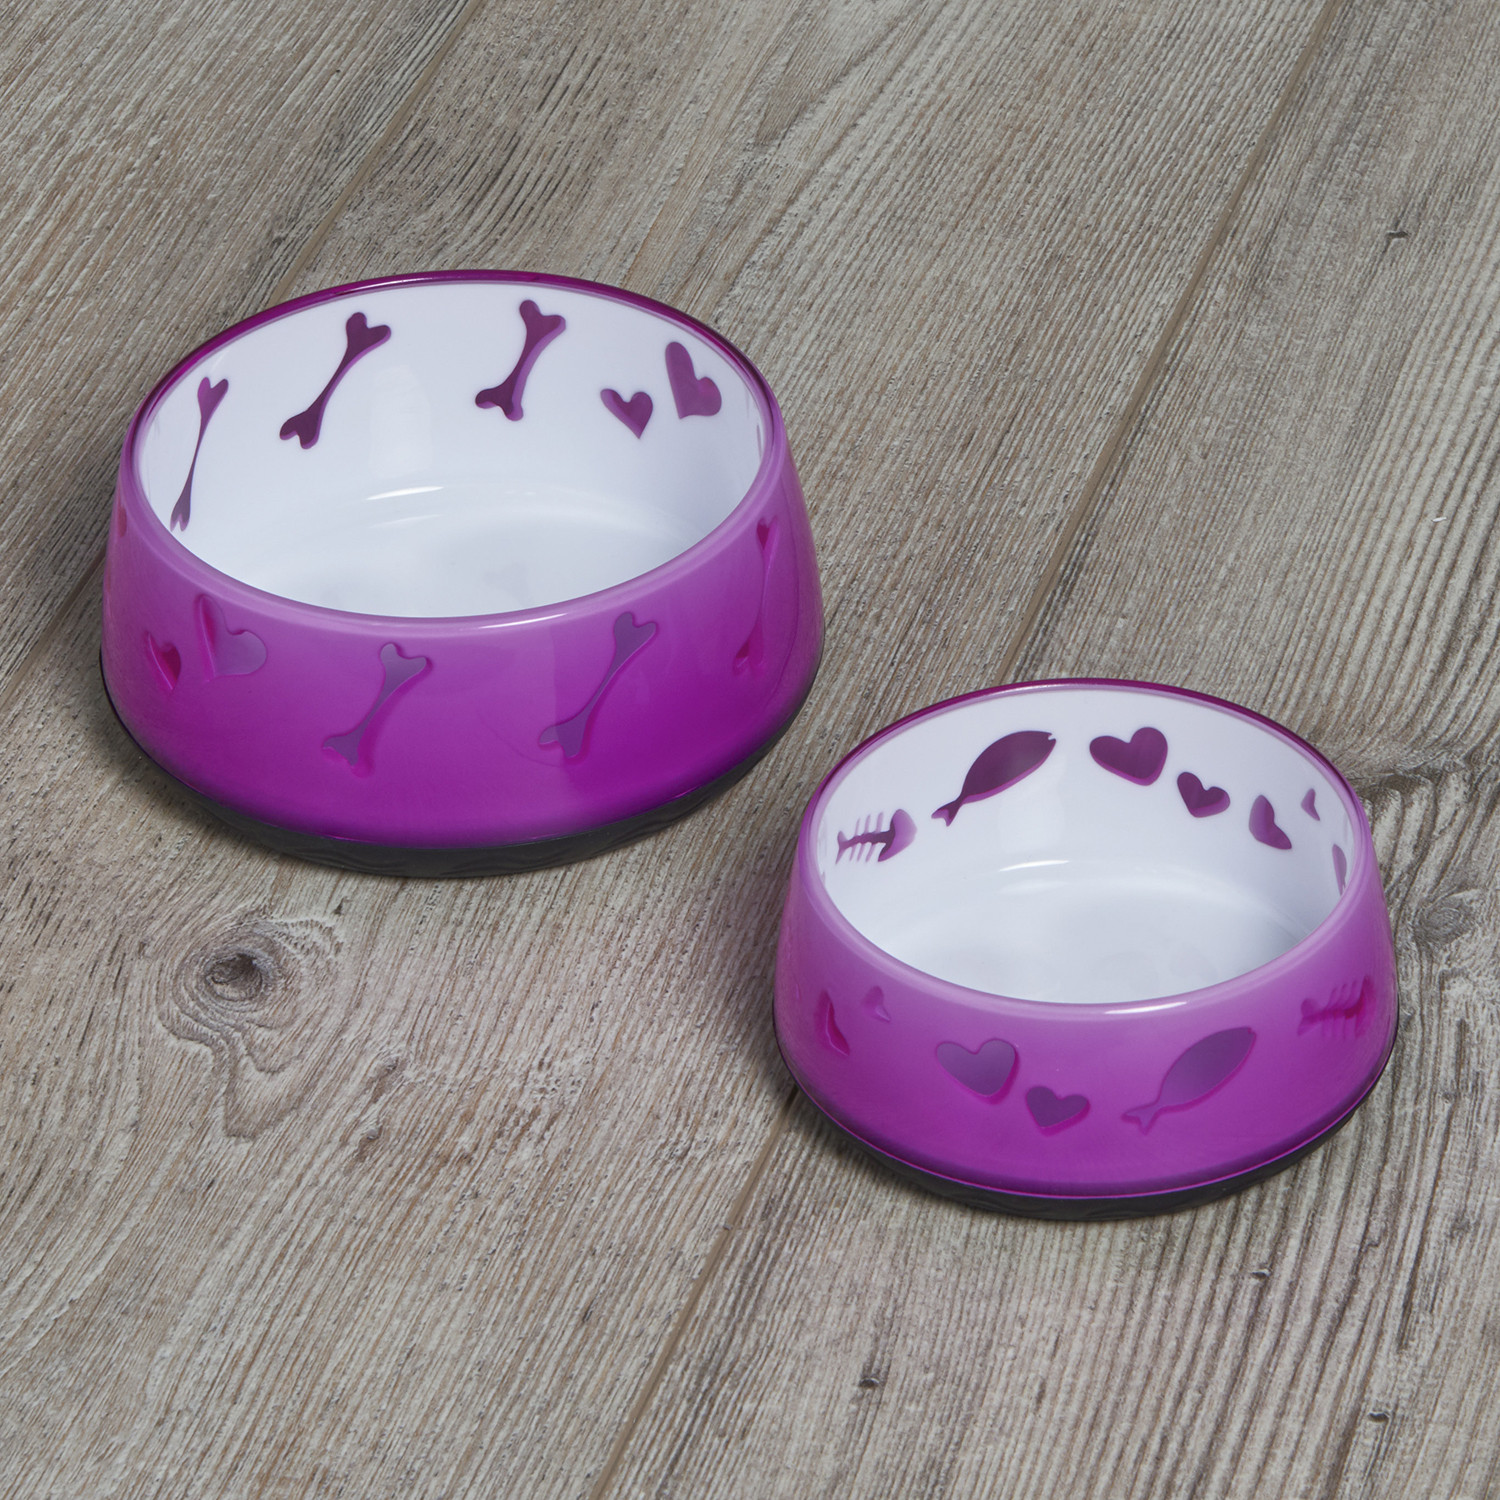 Clever Paws Neon Pet Bowl - Small Image 2